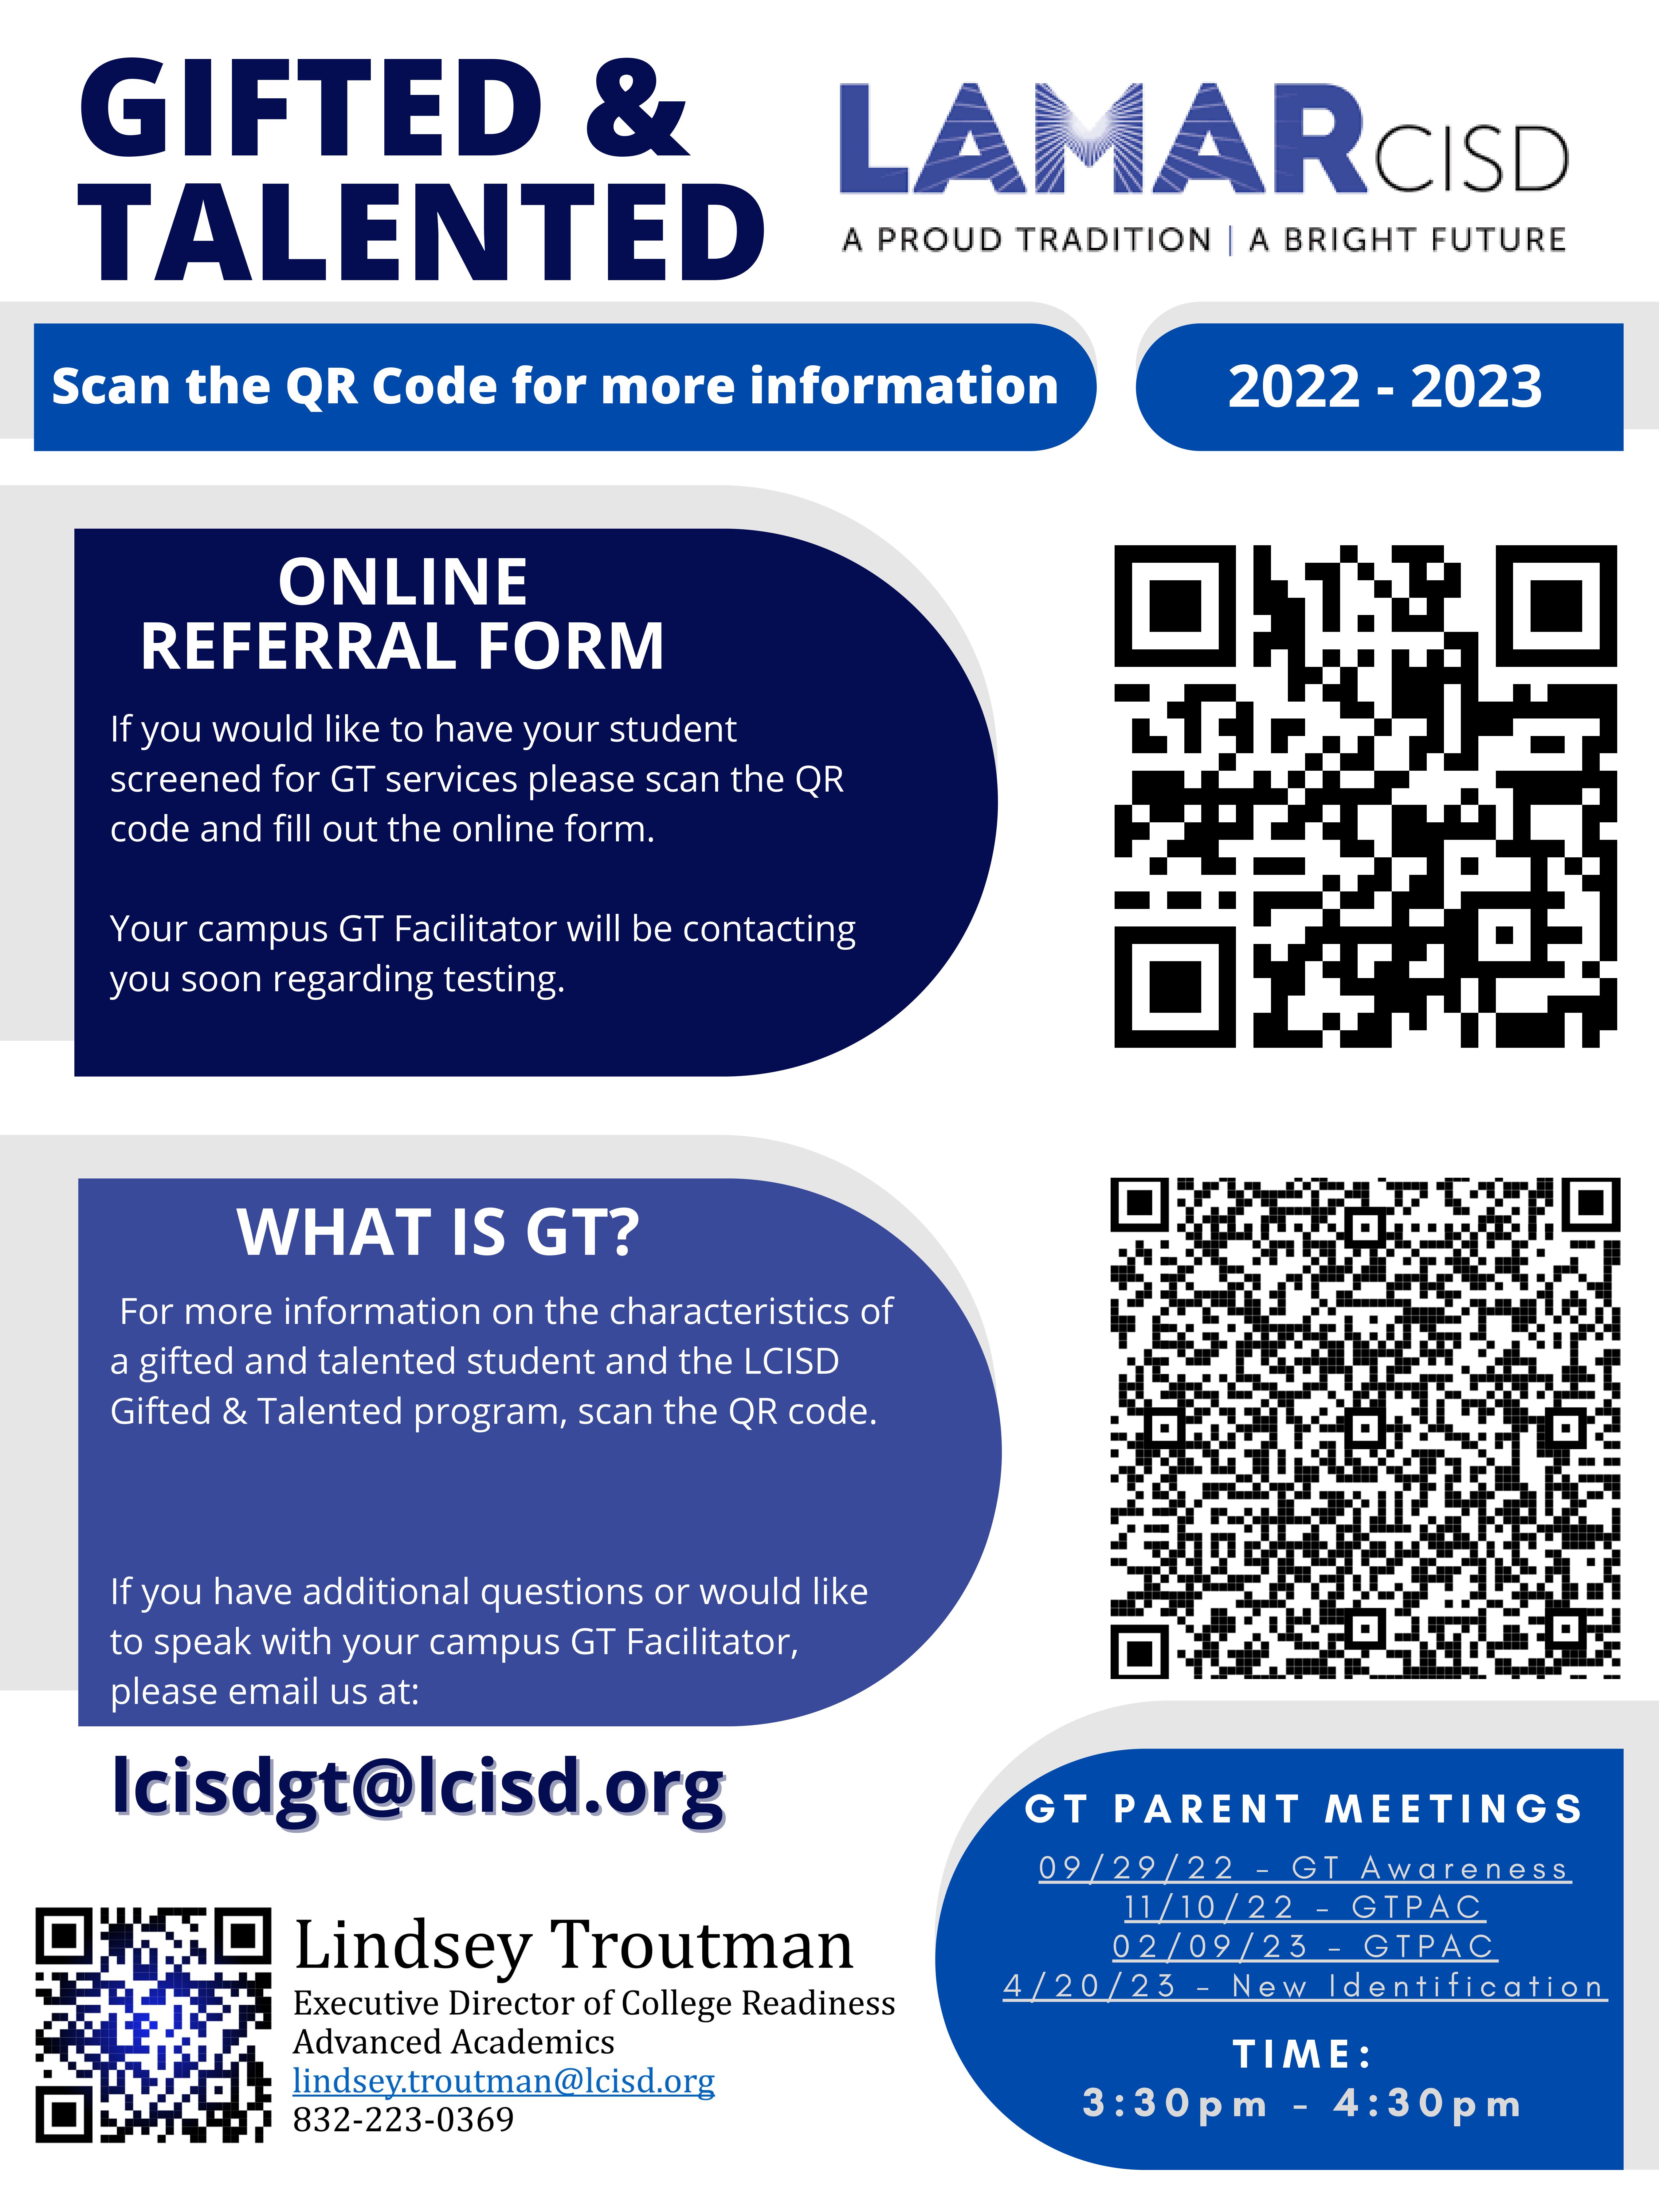 LCISD Gifted & Talented QR Codes